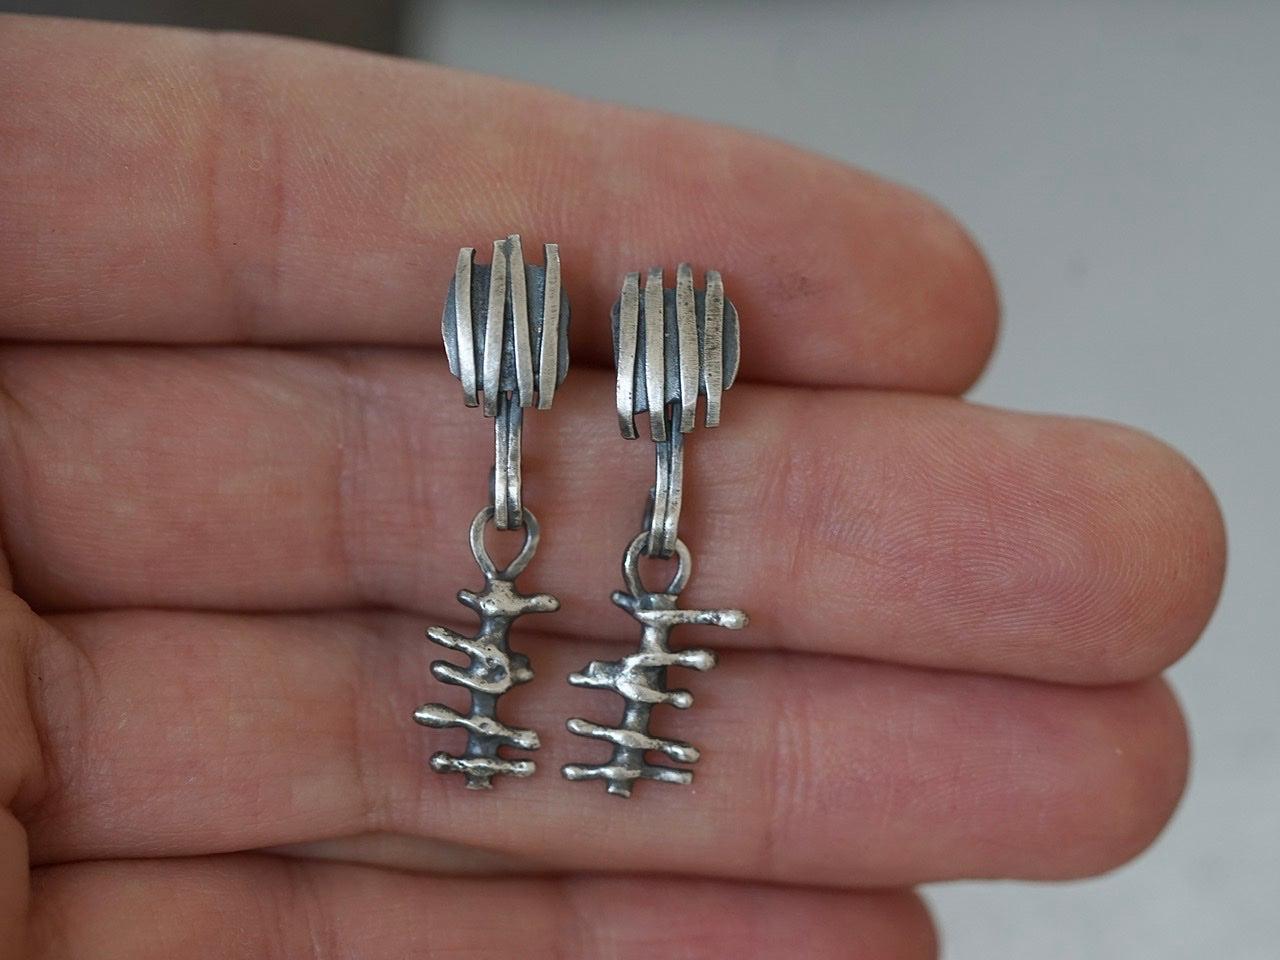 Remnants/ withered series, small skeletal sterling silver earrings